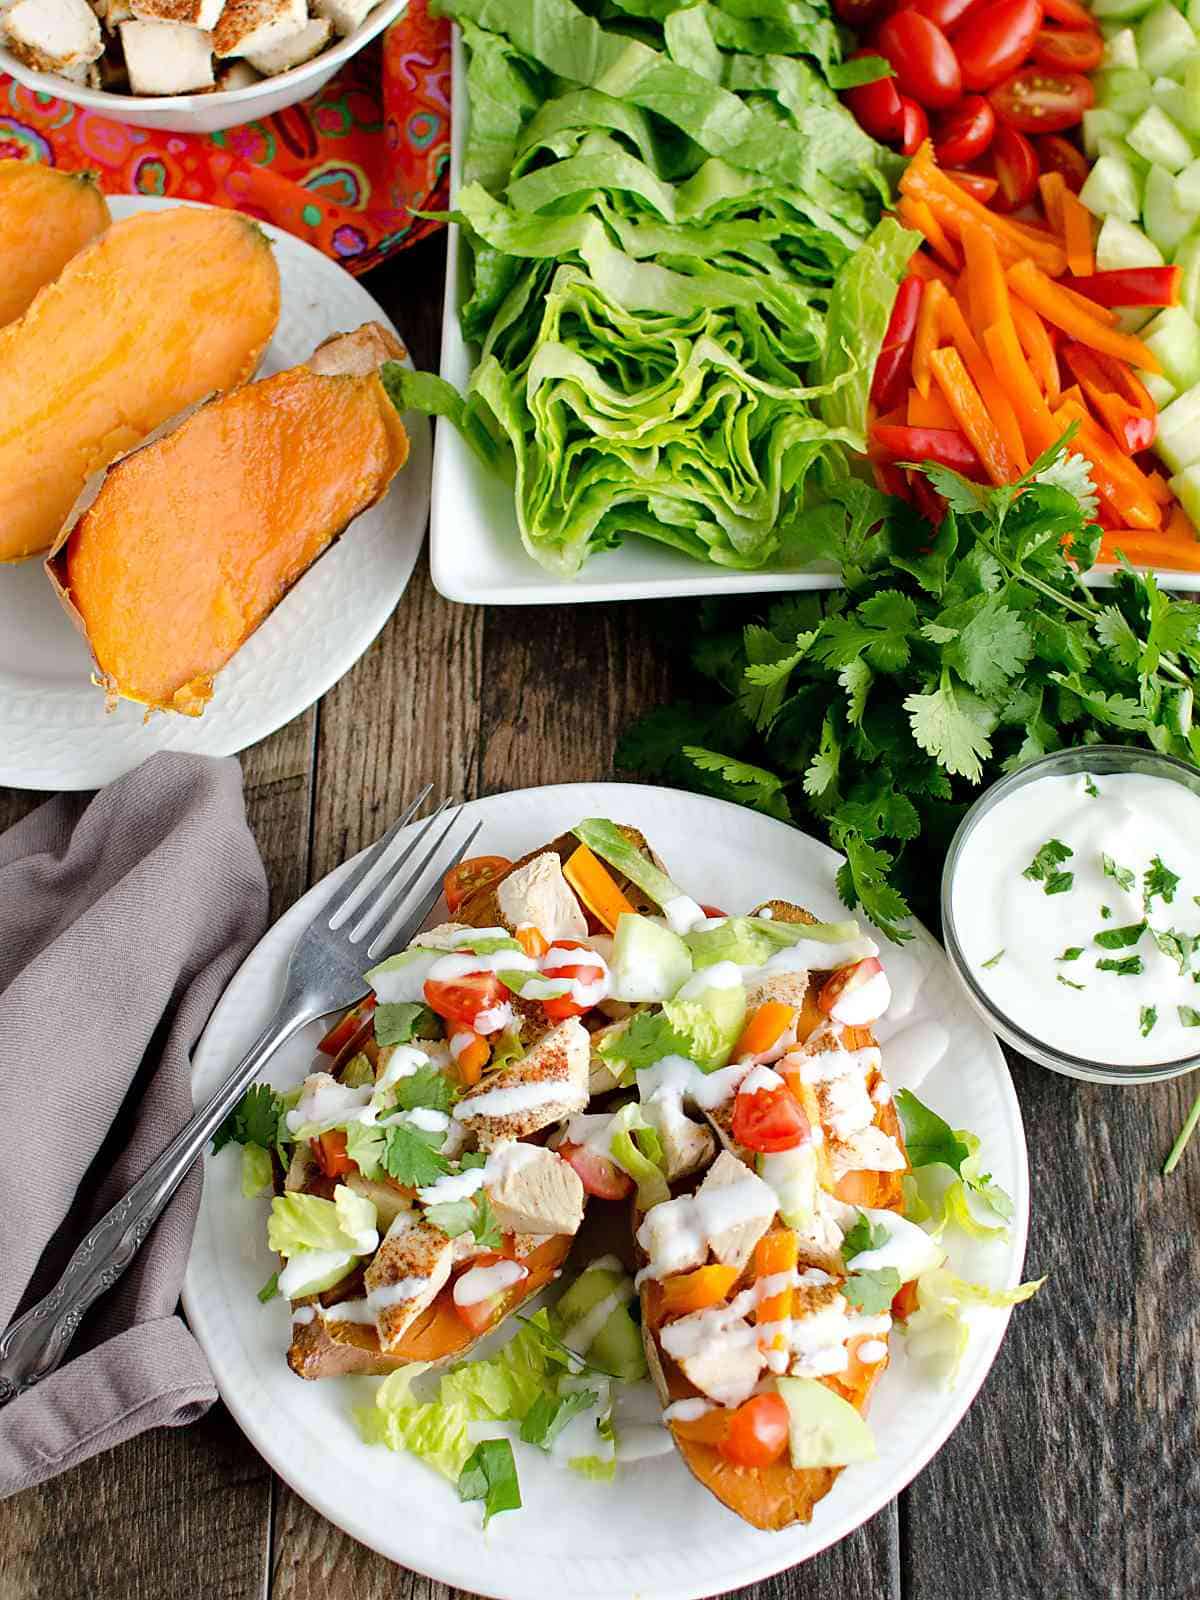 baked sweet potato sliced in half topped with seasoned chicken, lettuce, tomato, bell peppers and drizzled with sour cream.